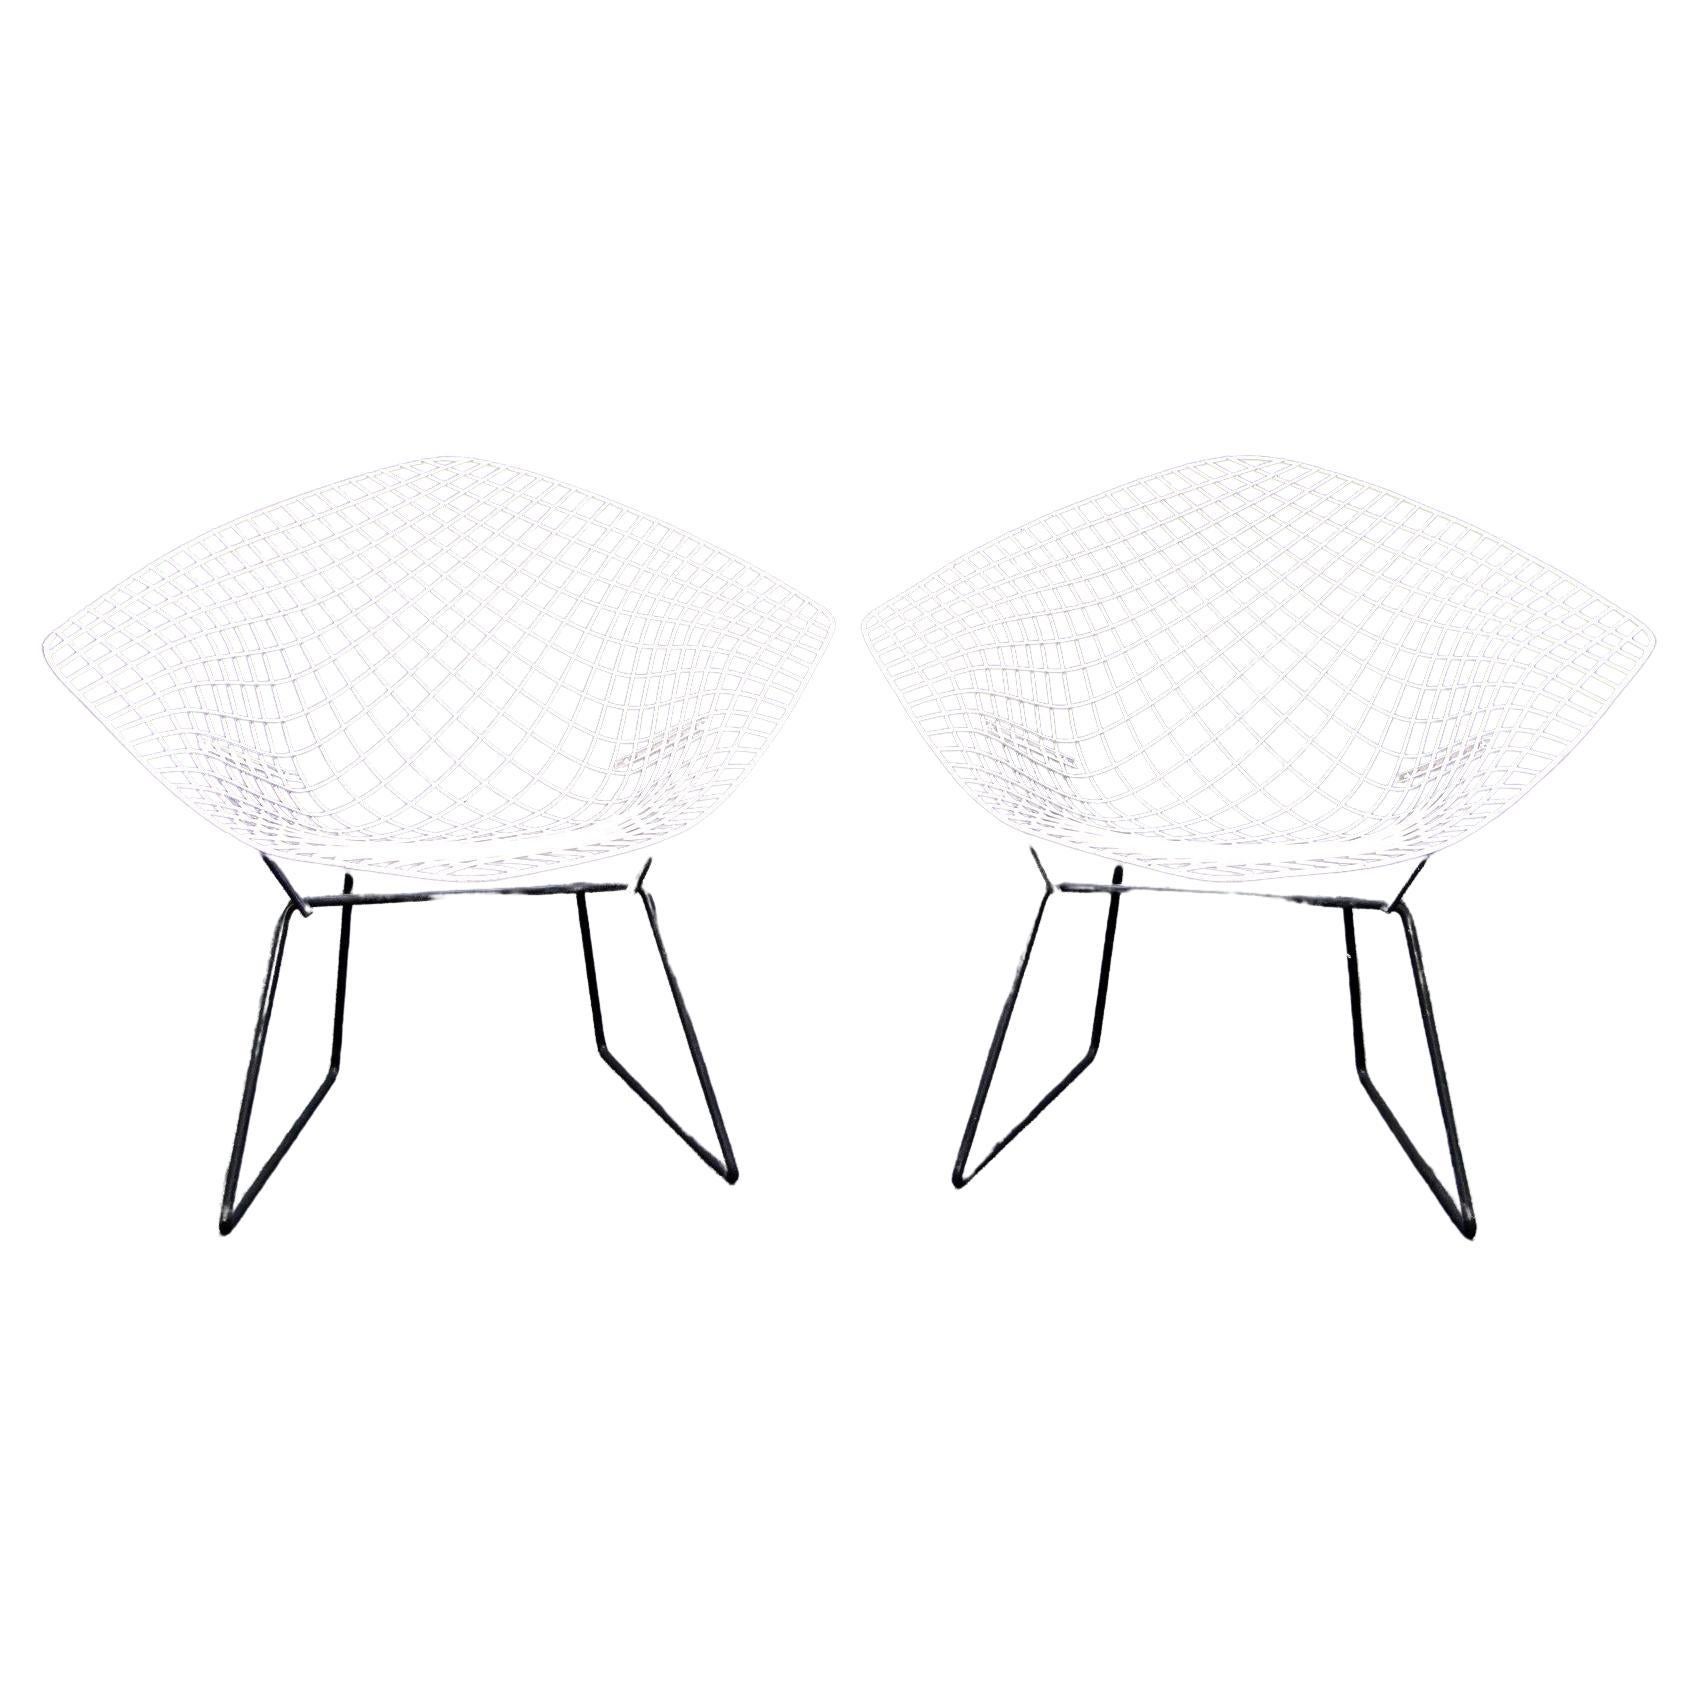 Two 1960s "421" Diamond Chairs By Harry Bertoia For Knoll International For Sale